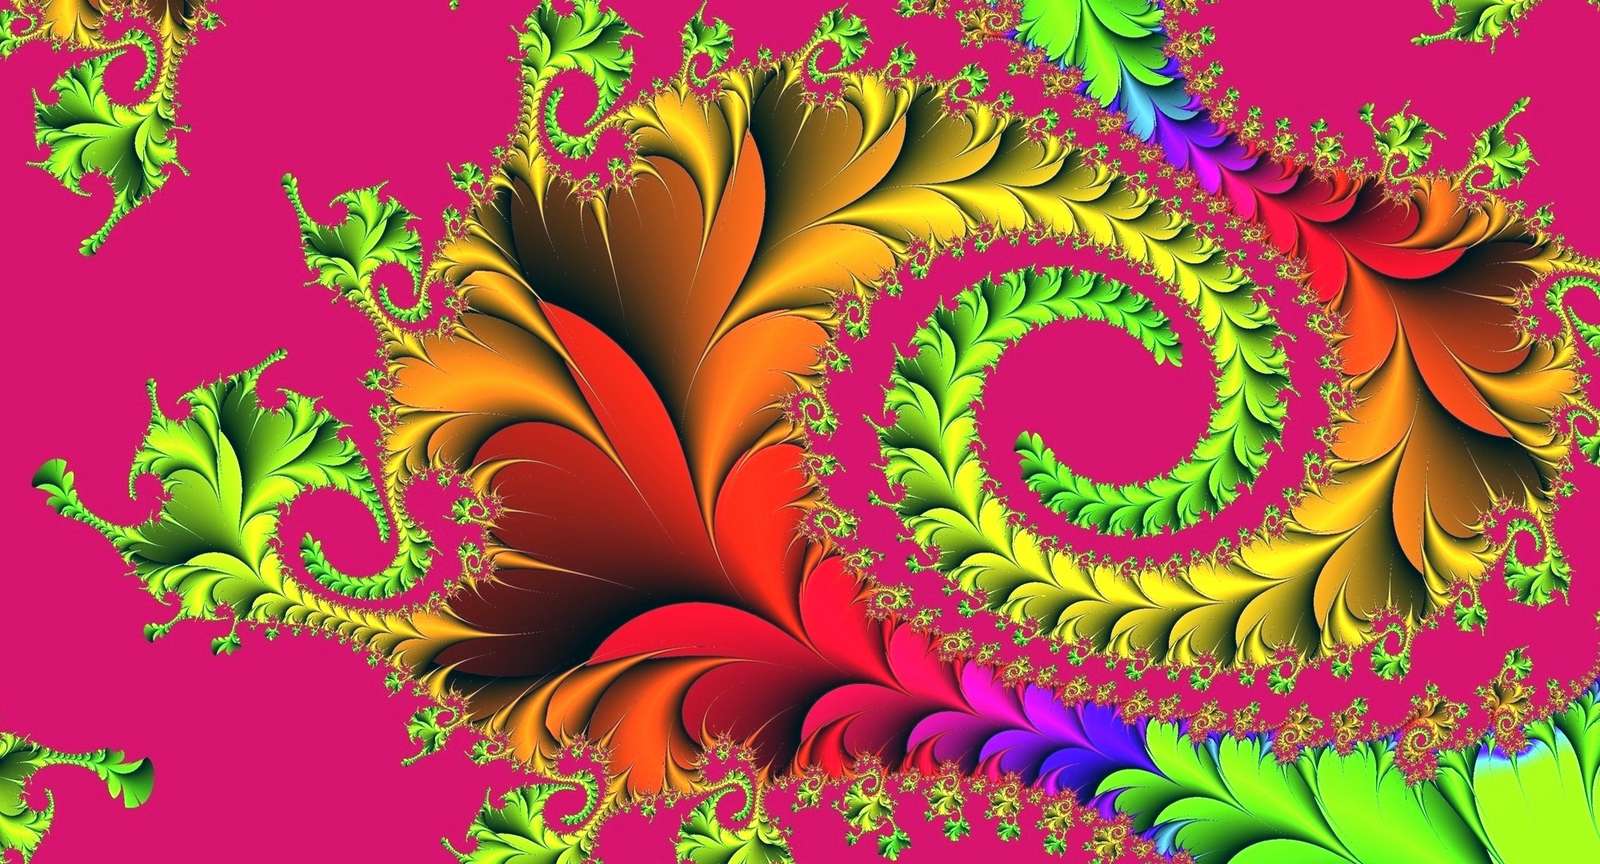 Abstraction jigsaw puzzle online